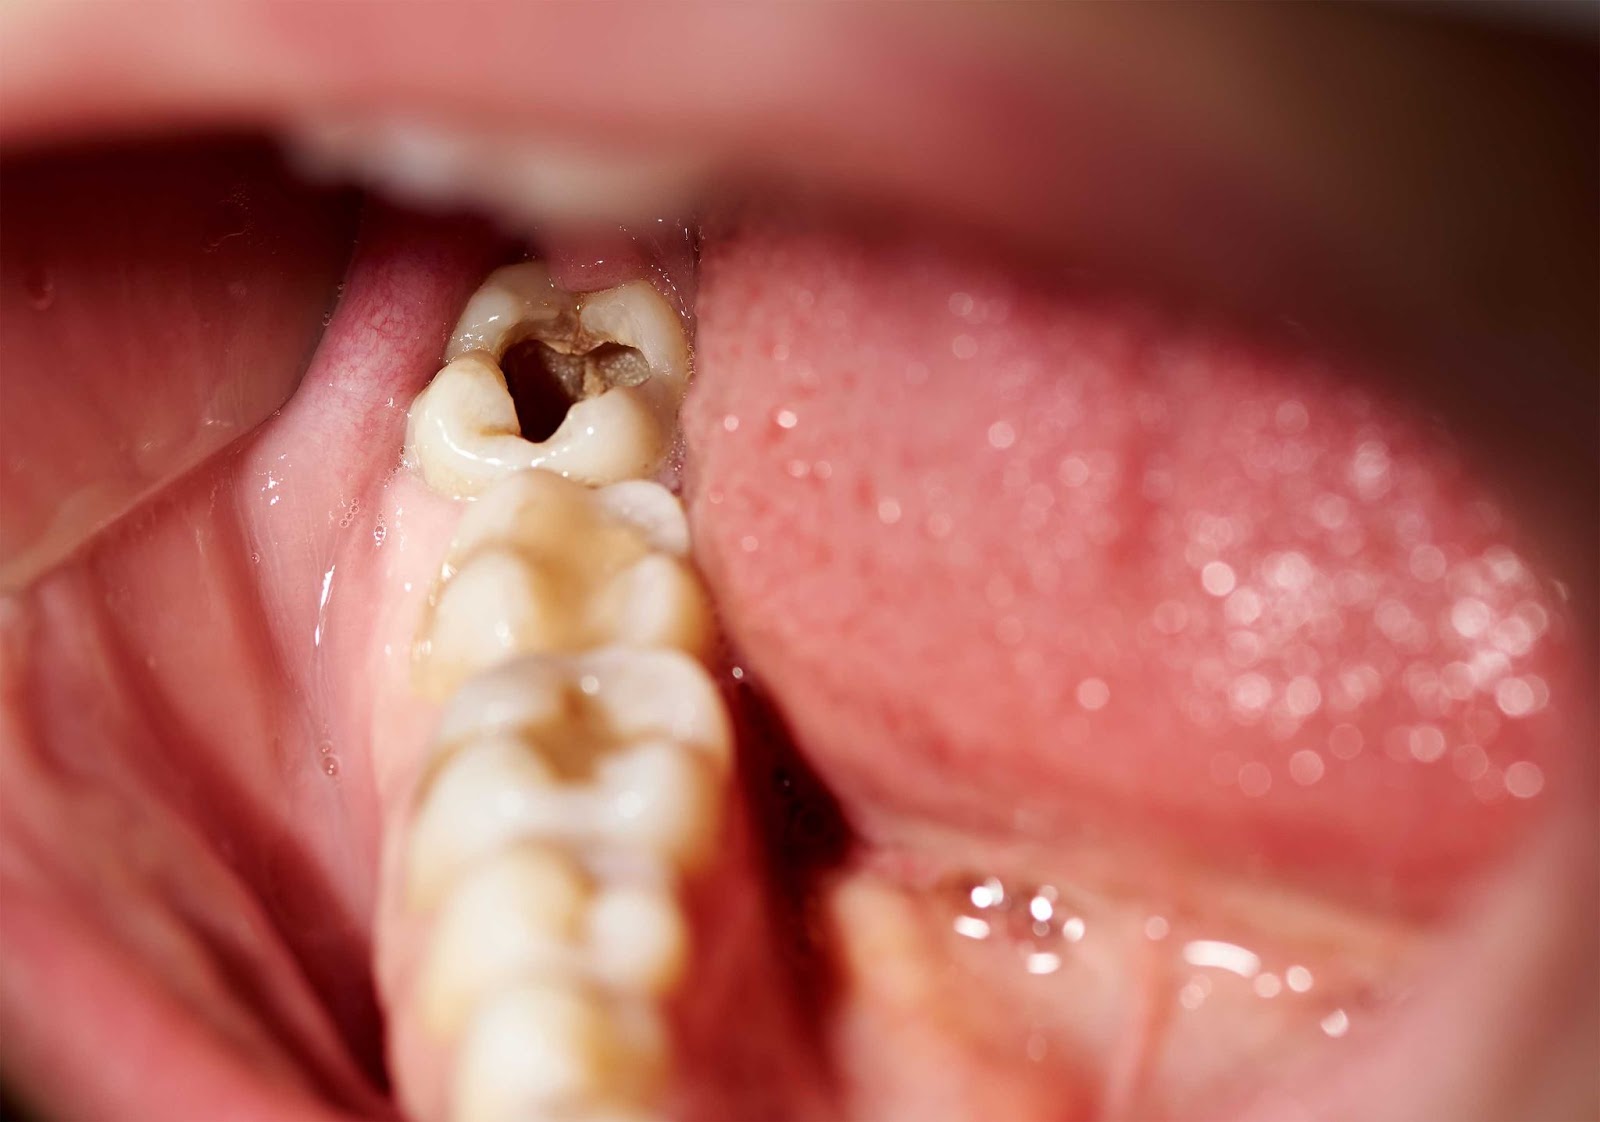 The Tooth Decay Process: How To Reverse It and Avoid a Cavity